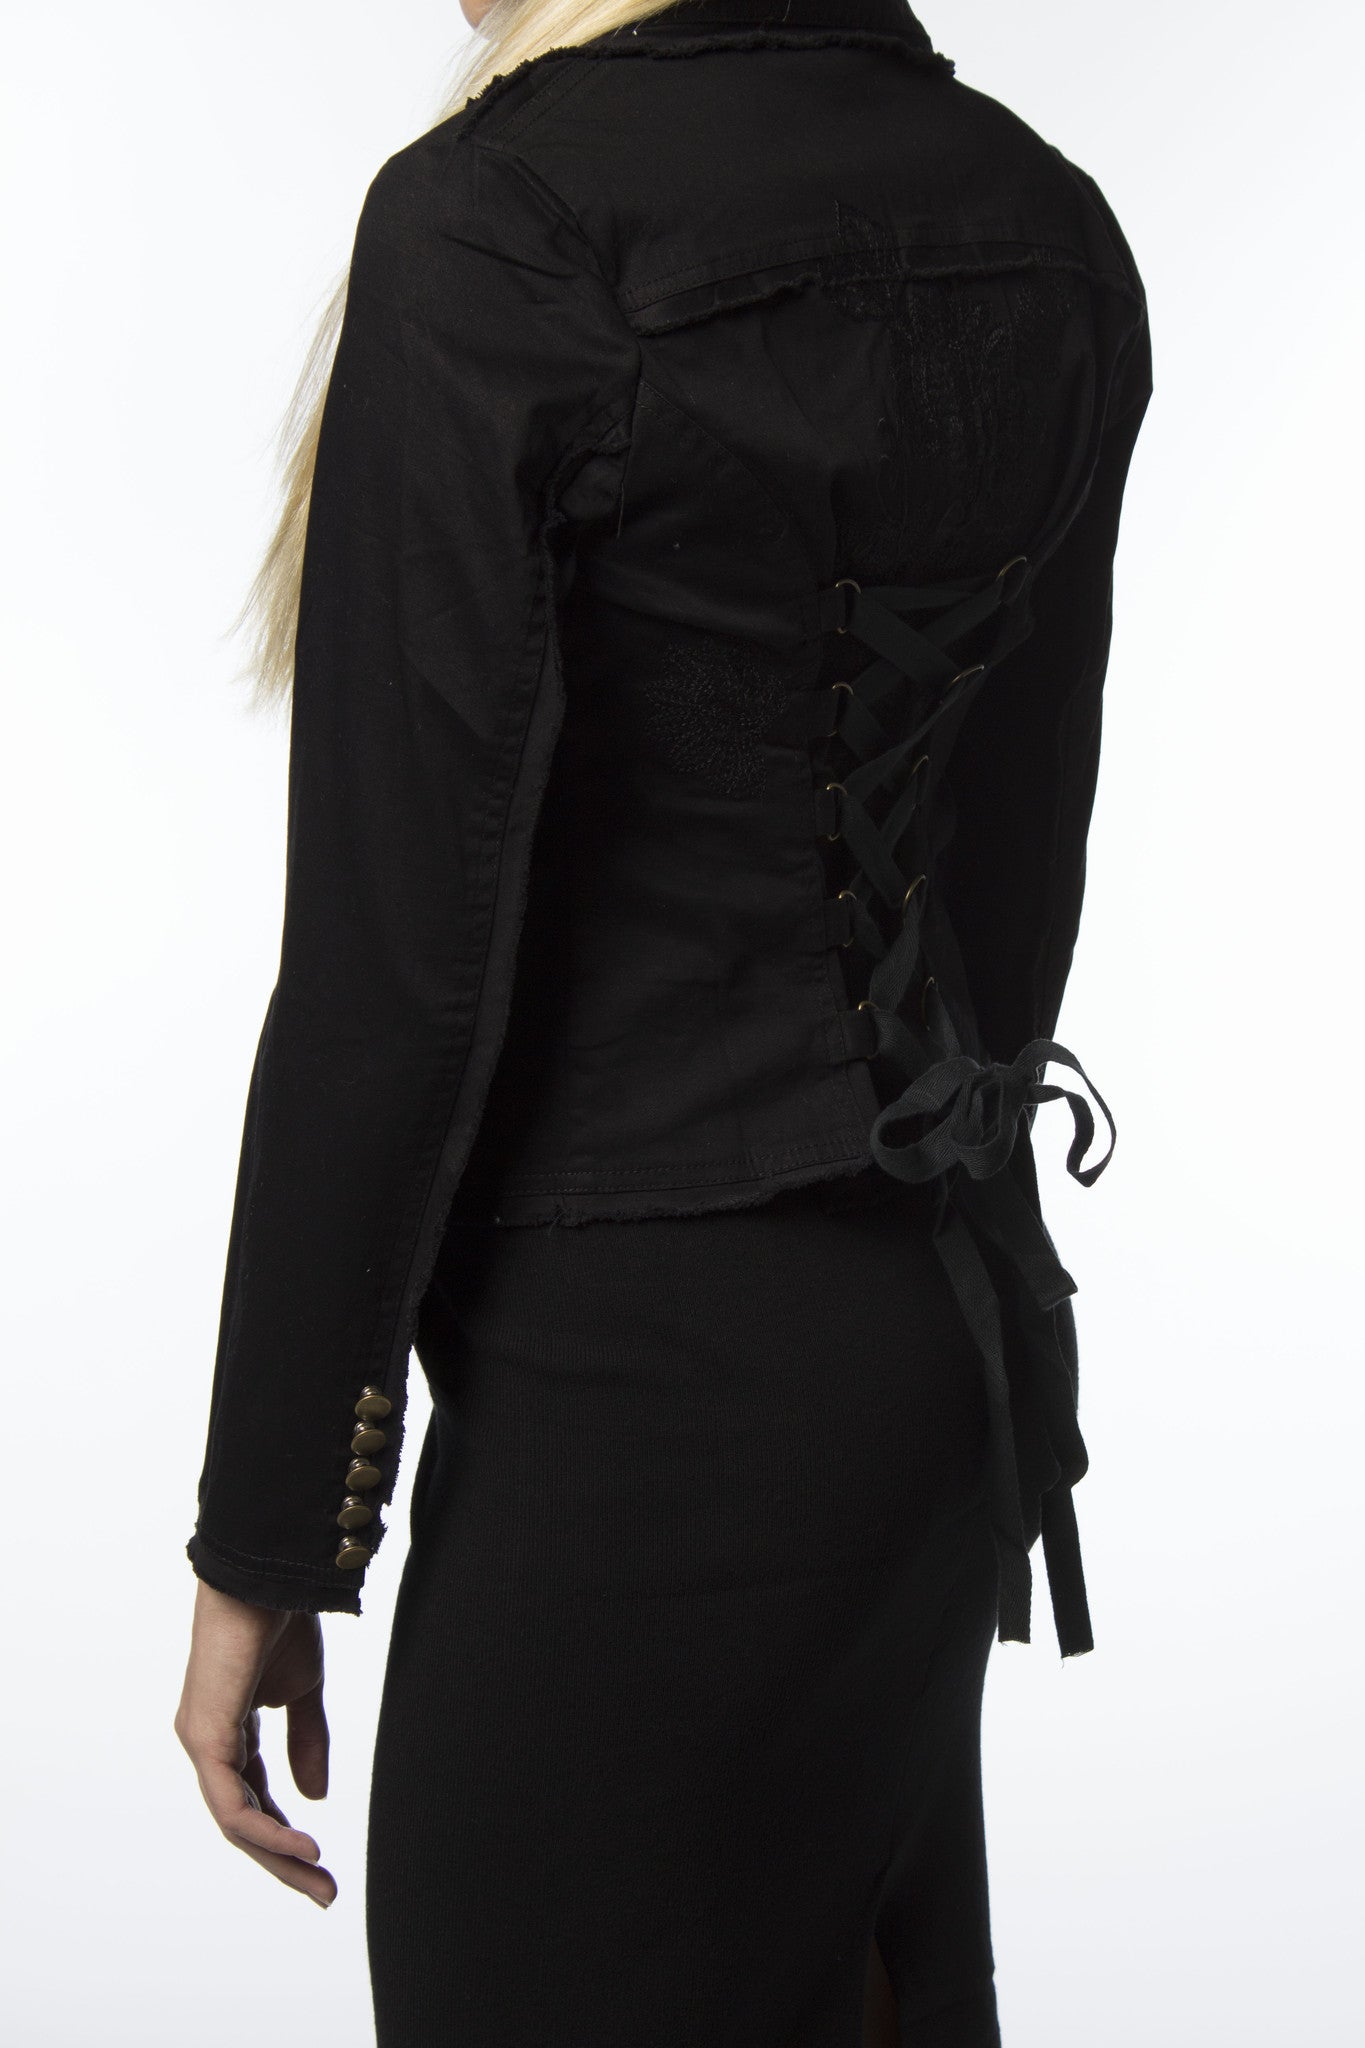 Corset Tie-Up Cotton Black Jacket, Womens Clothing and Fashion